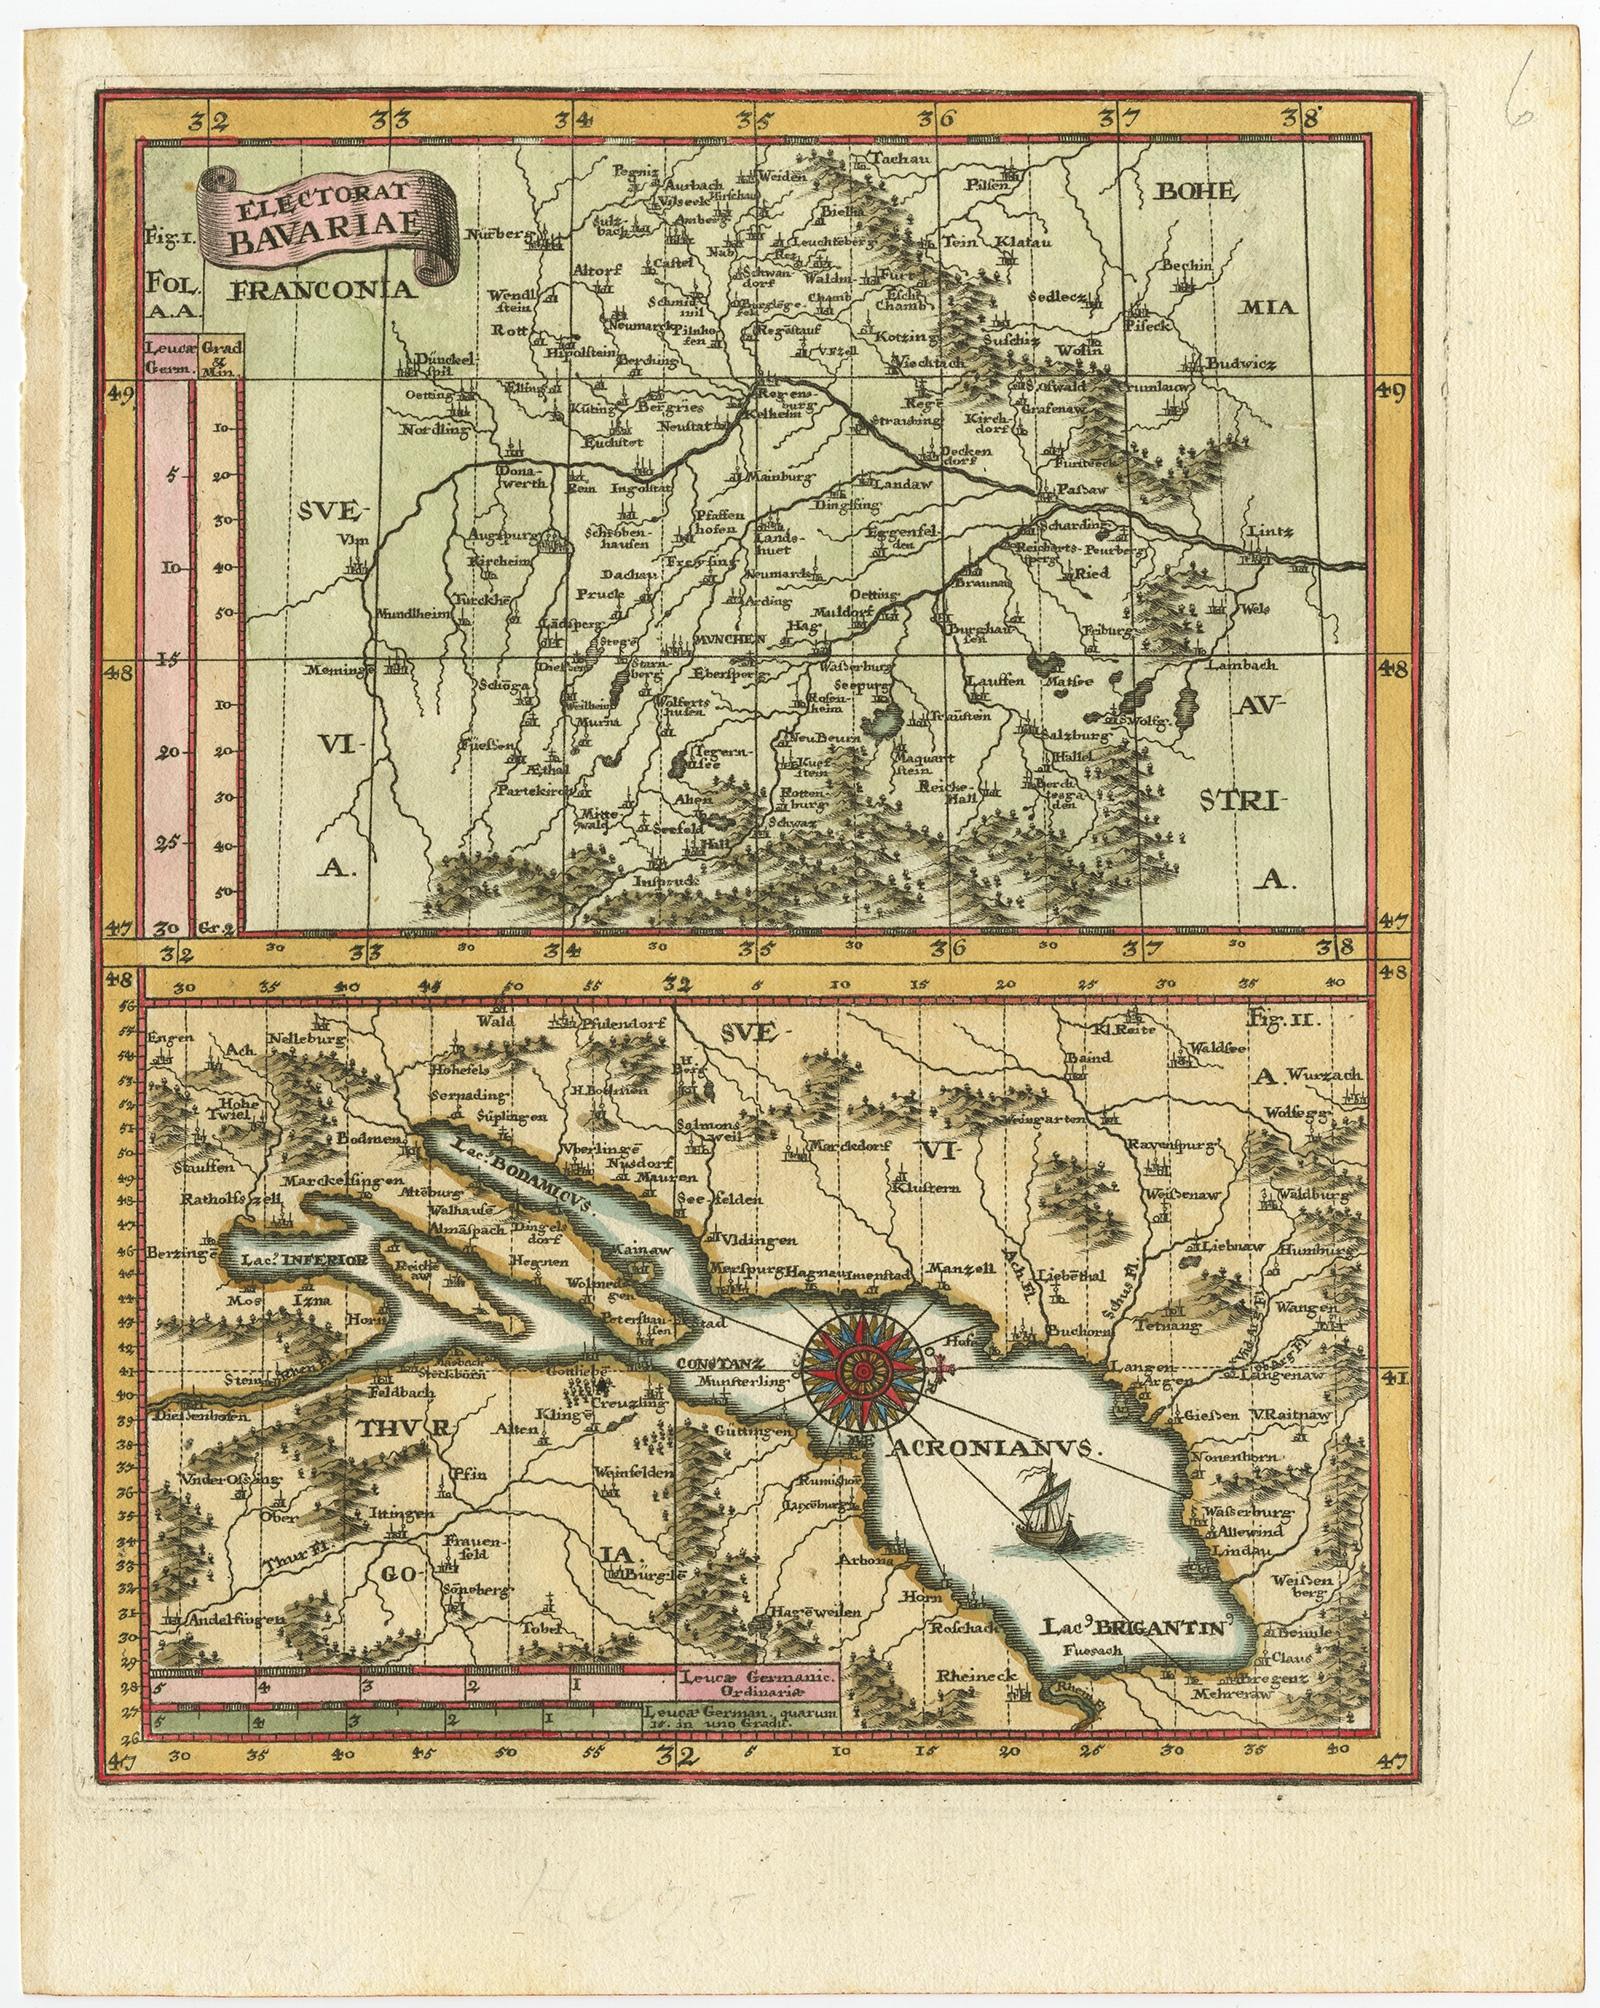 Antique map titled 'Electorat Bavariae.' Map of the Electorate of Bavaria by the Jesuit Heinrich Scherer. The lower map shows the Lake Constance. Source unknown, to be determined.

Artists and Engravers: Heinrich Scherer (1628-1704) was a